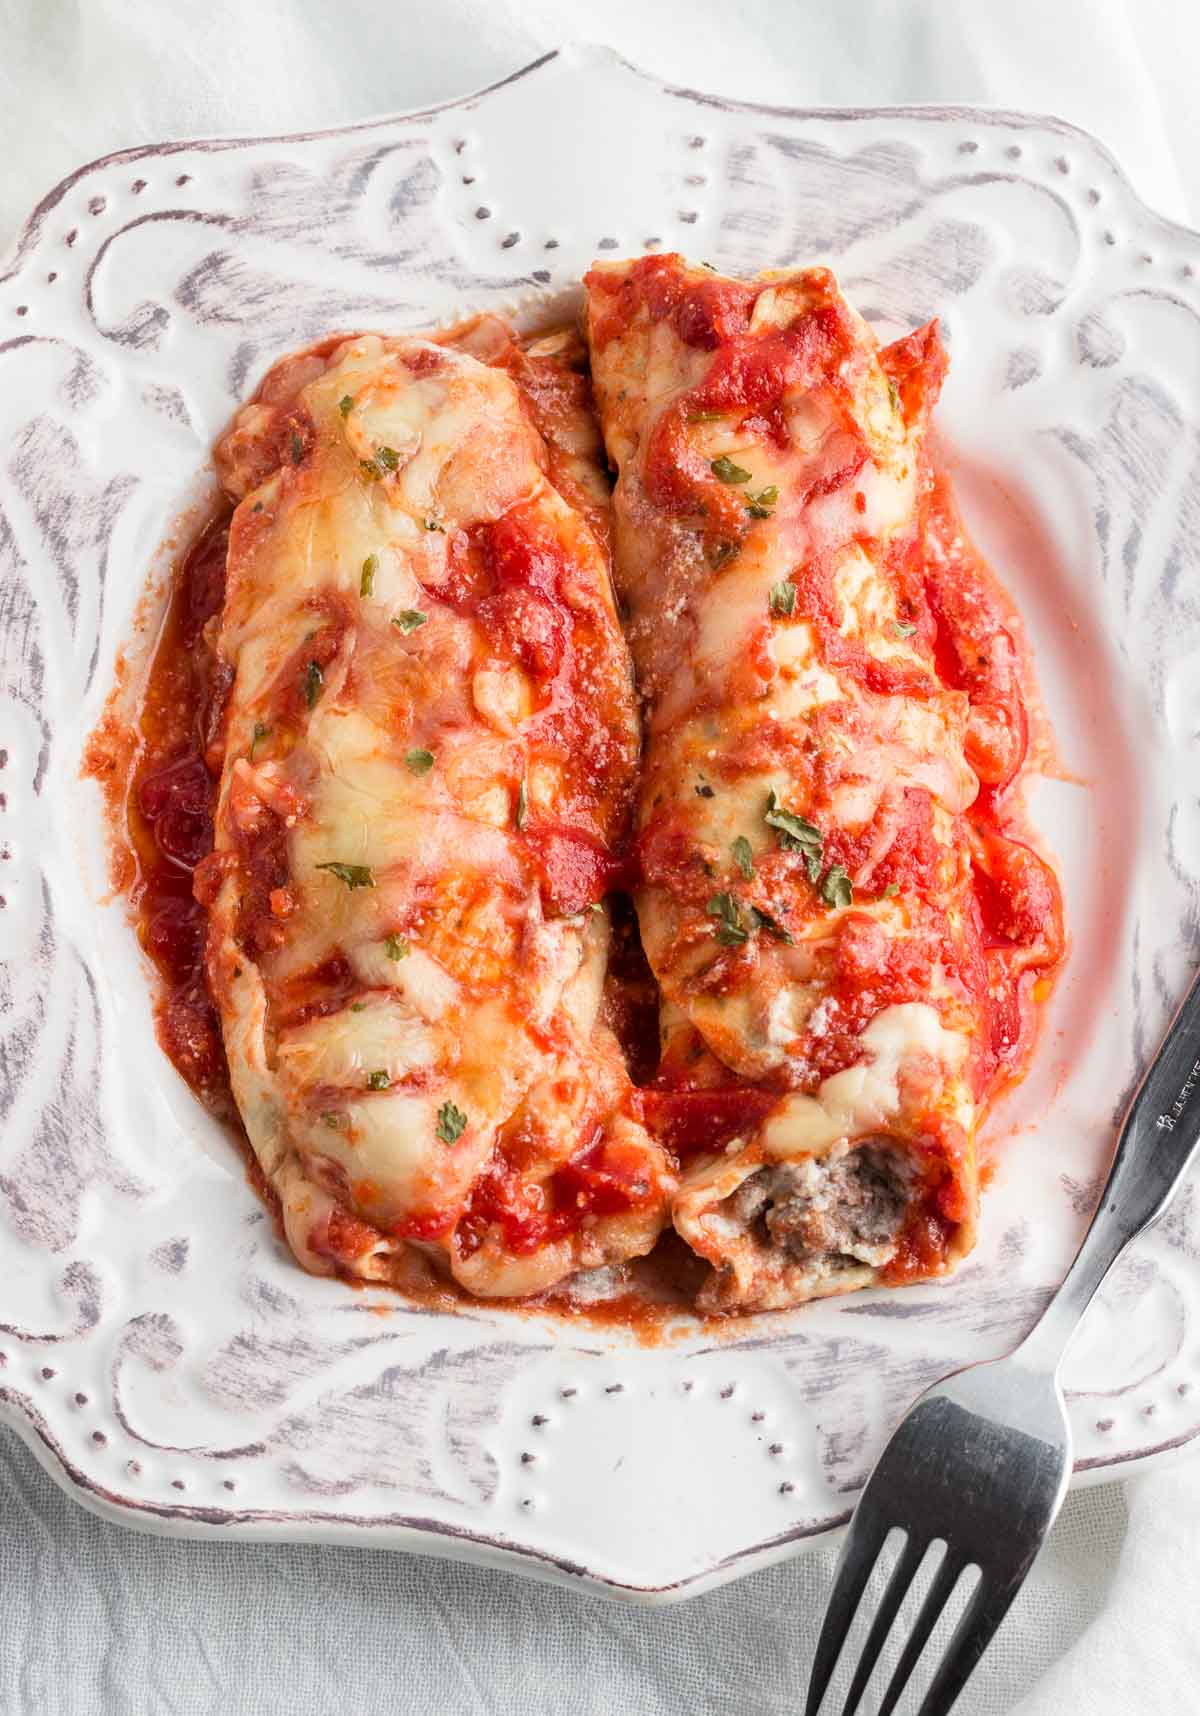 Two low carb beef and cheese manicotti rolls in sauce.